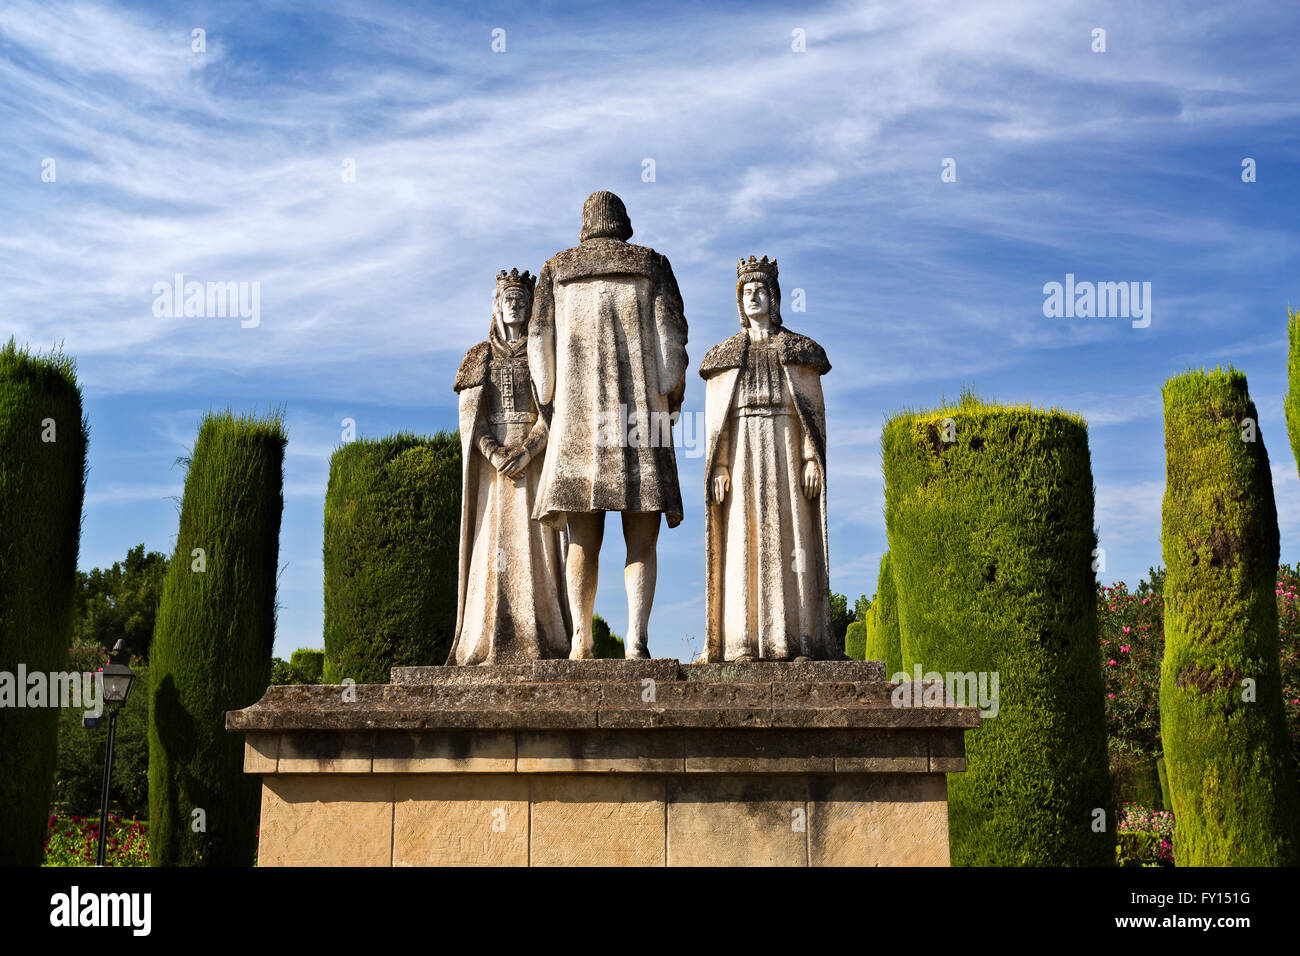 Statues of the Catholic Monarchs (Ferdinand and Isabella) and Christopher Columbus in the gardens of the Alcazar de Cordoba, Spa Stock Photo